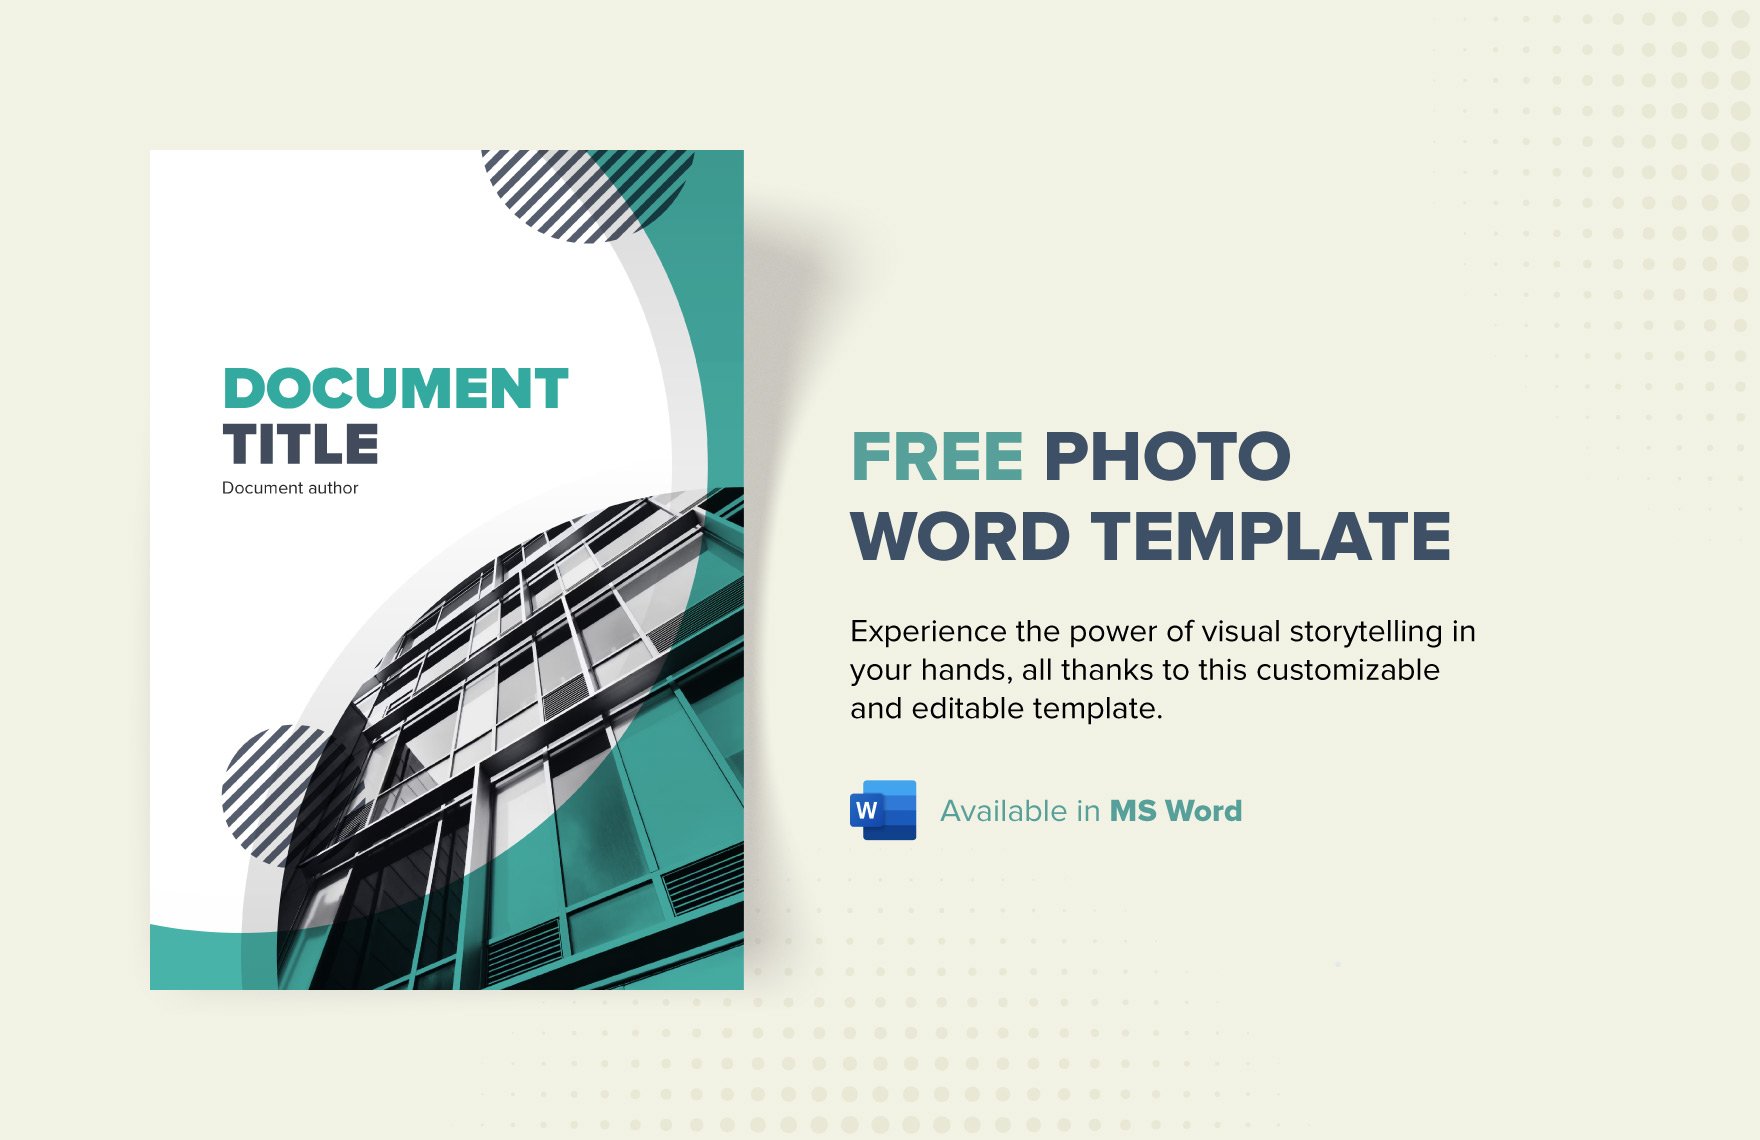 Photo Word Template